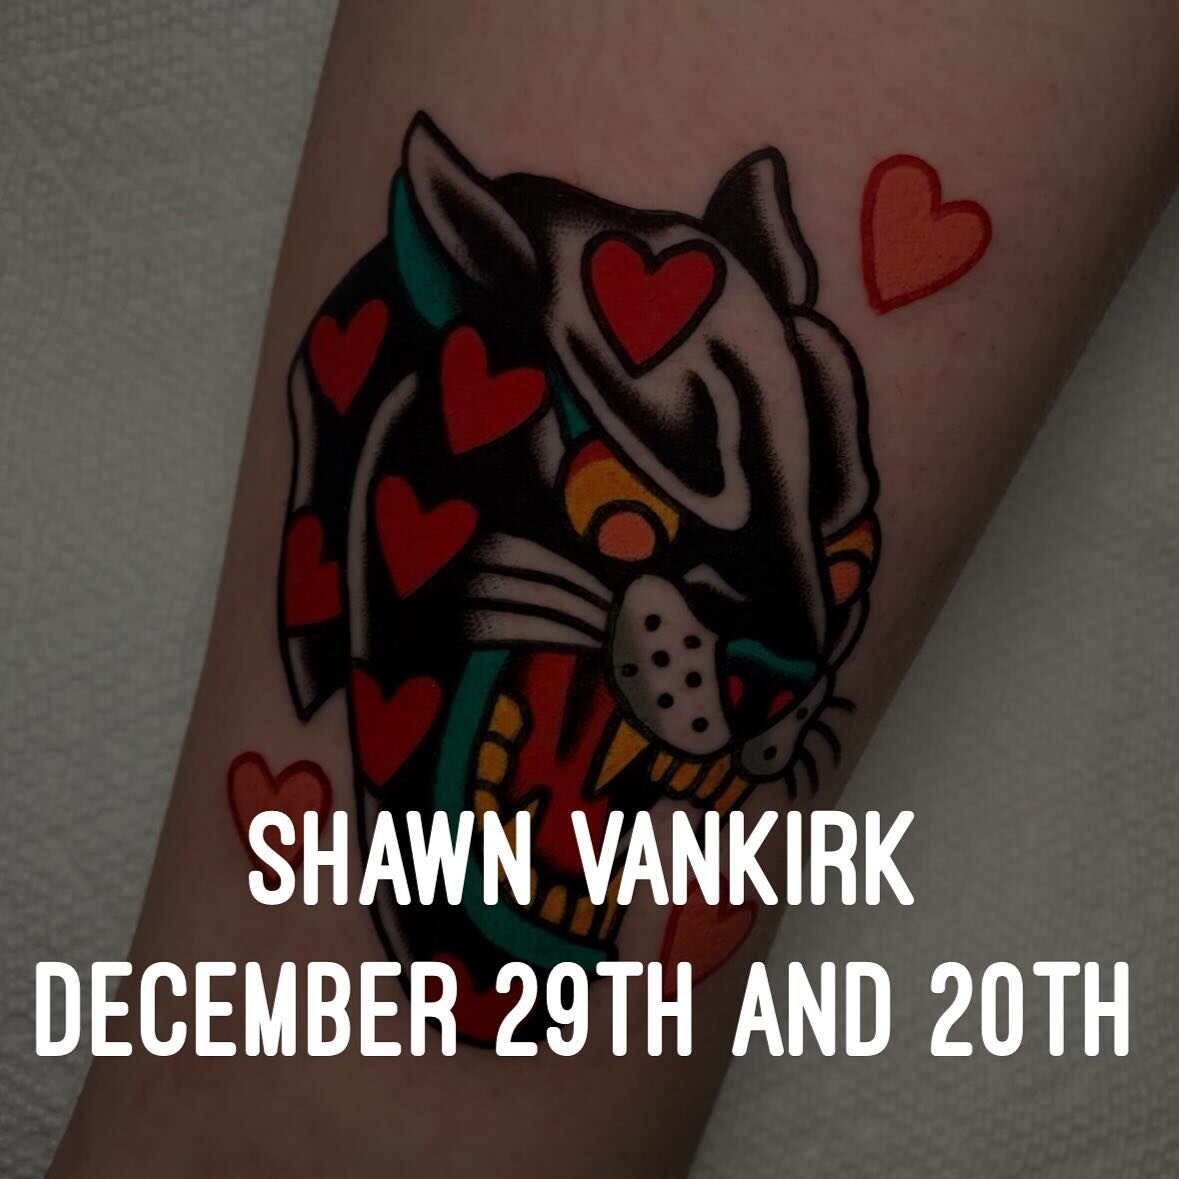 @vankirk_tattoo will be guesting with us at Eight Bells on December 29th and 30th! Please contact him directly to book!